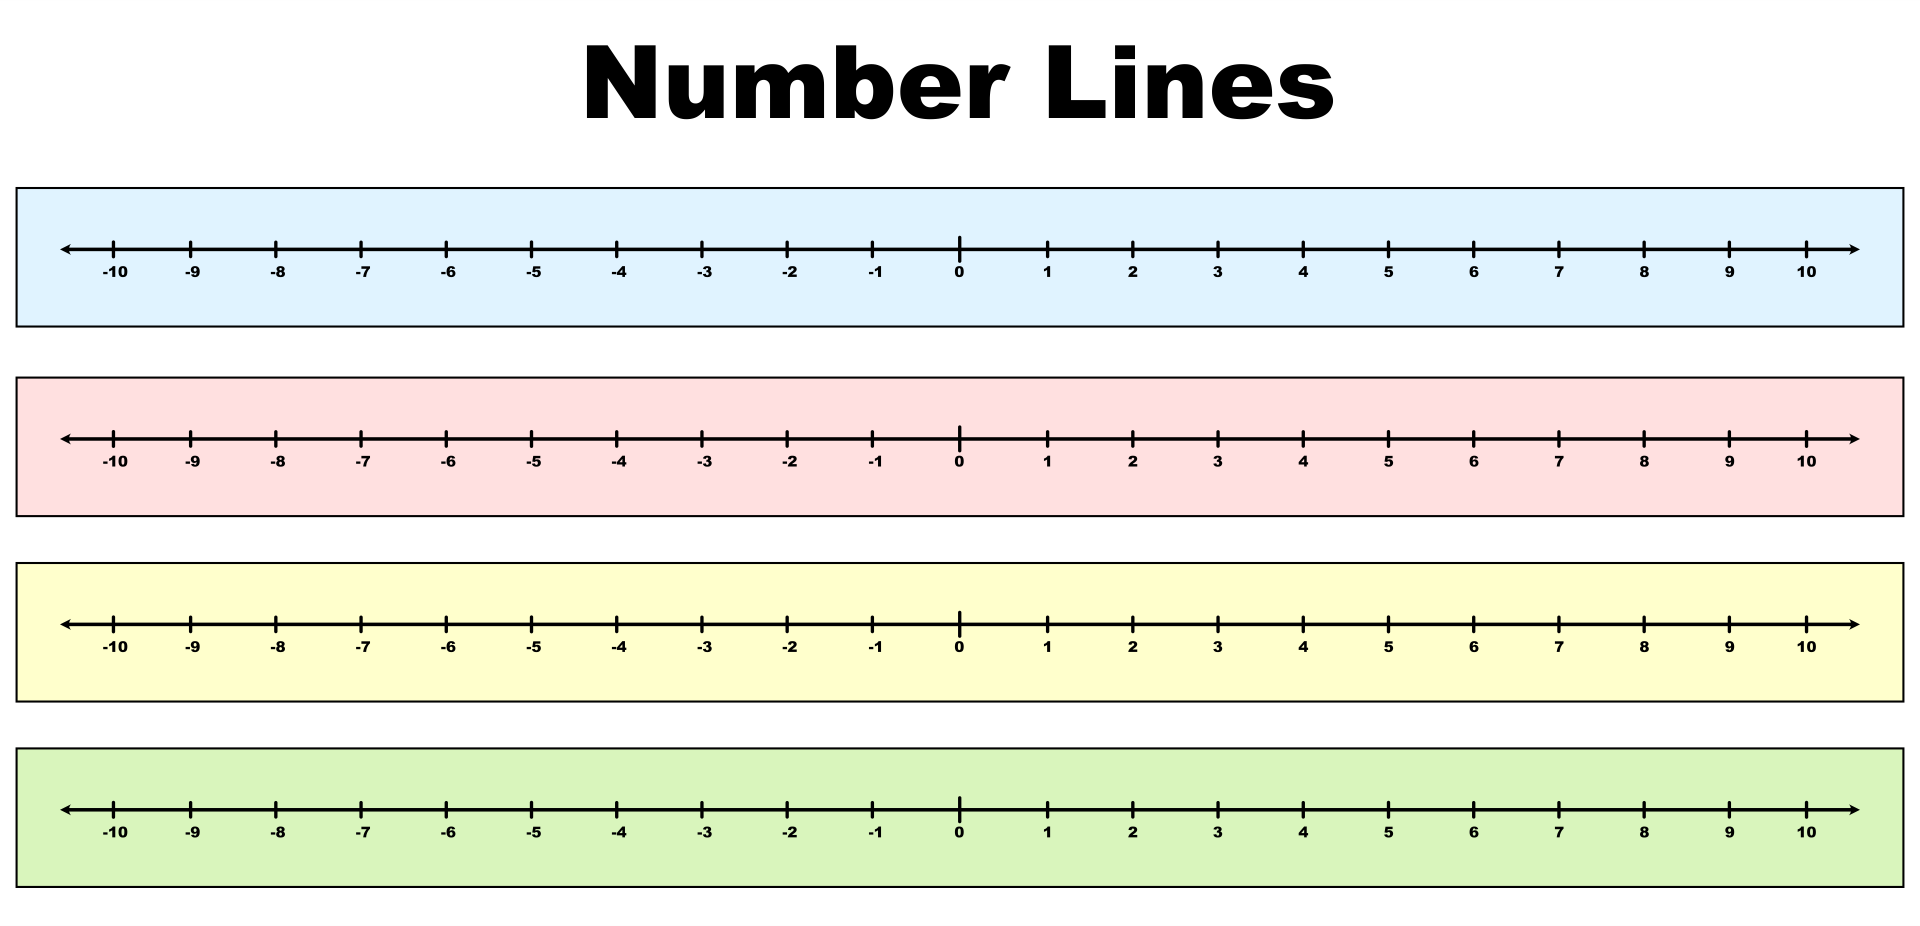 Number Lines With Positive And Negative Numbers Printable